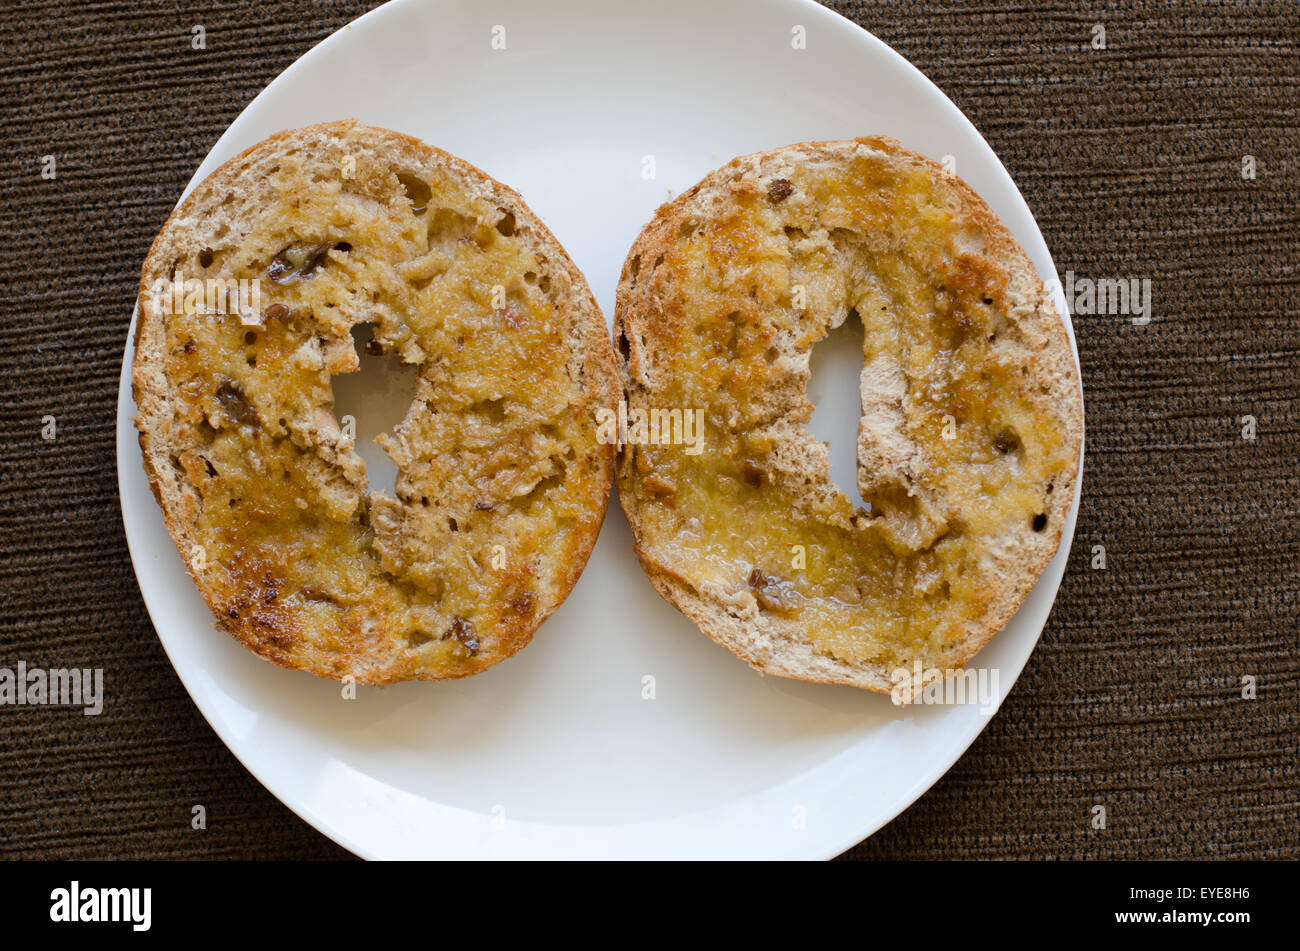 Two halves of a toasted raisin bagel with butter on a white plate Stock Photo